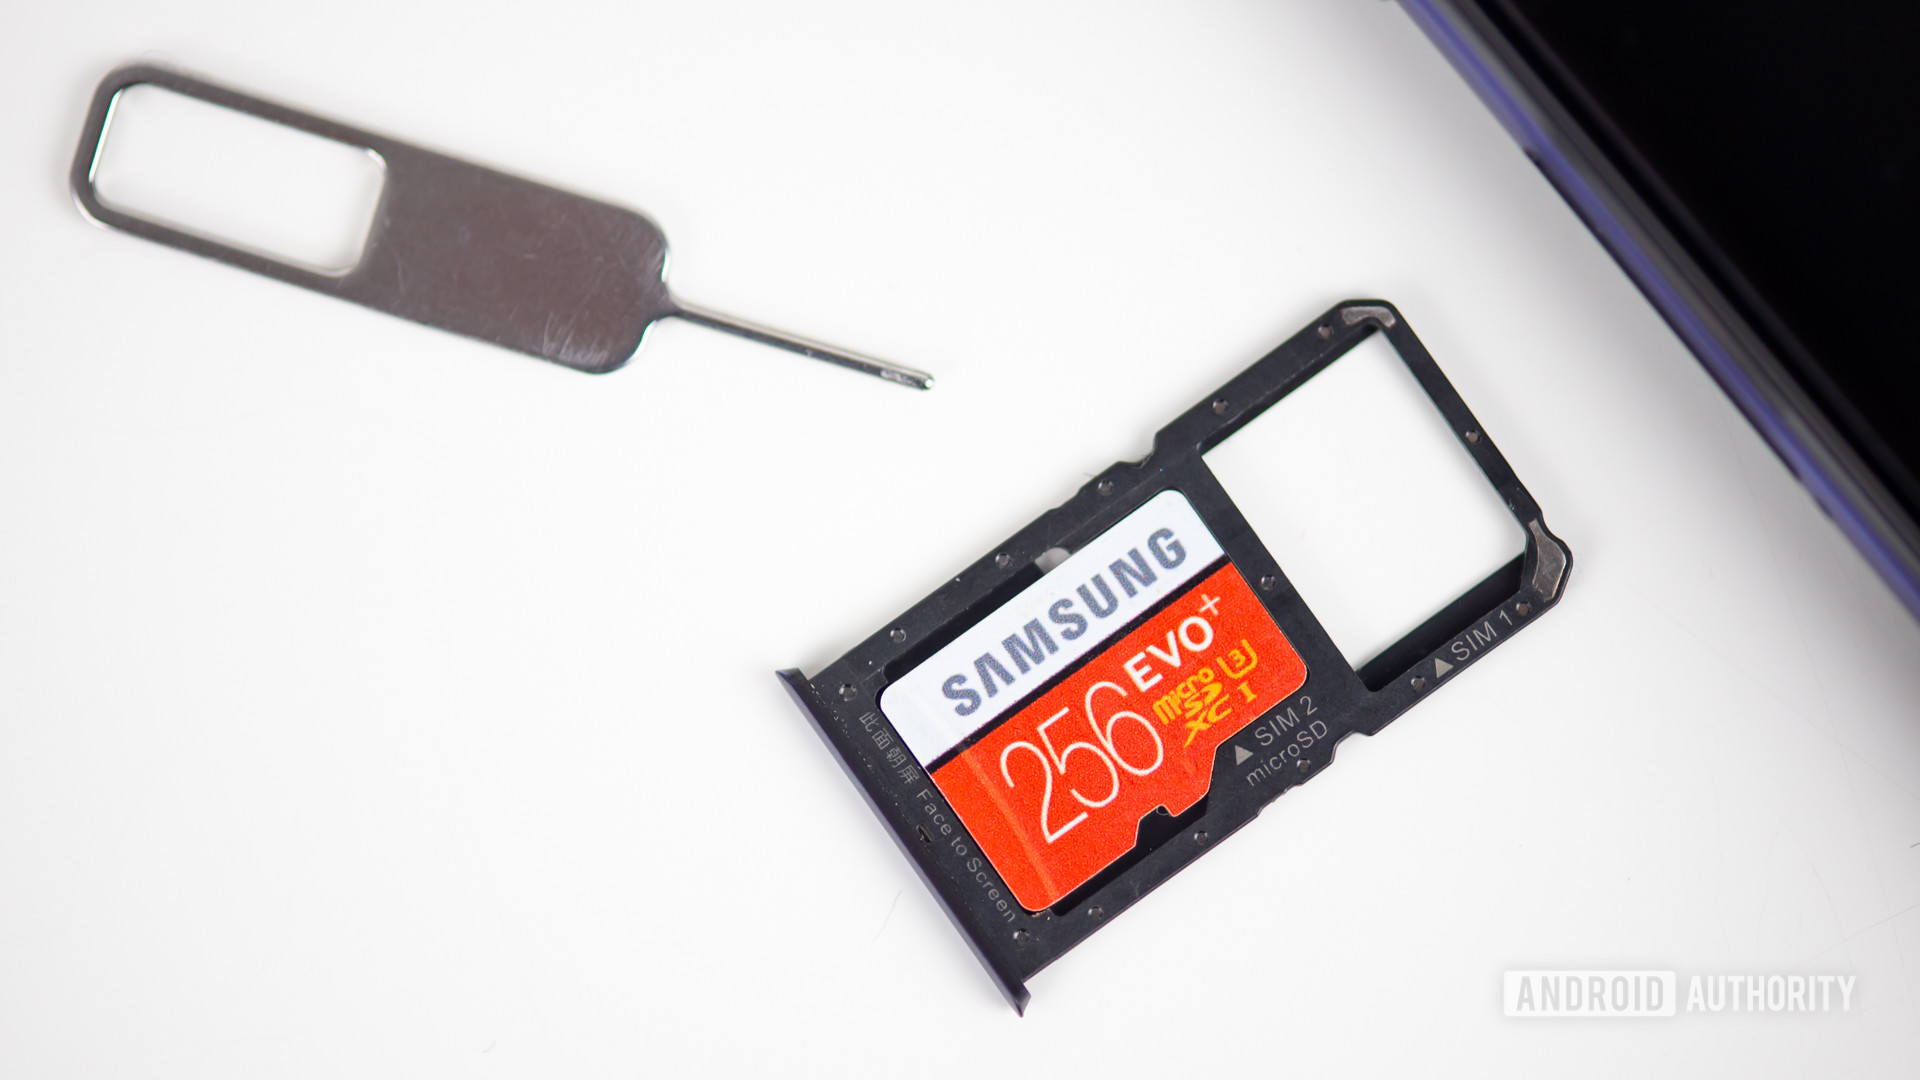 MicroSD card slot for Chromebook Recovery Utility